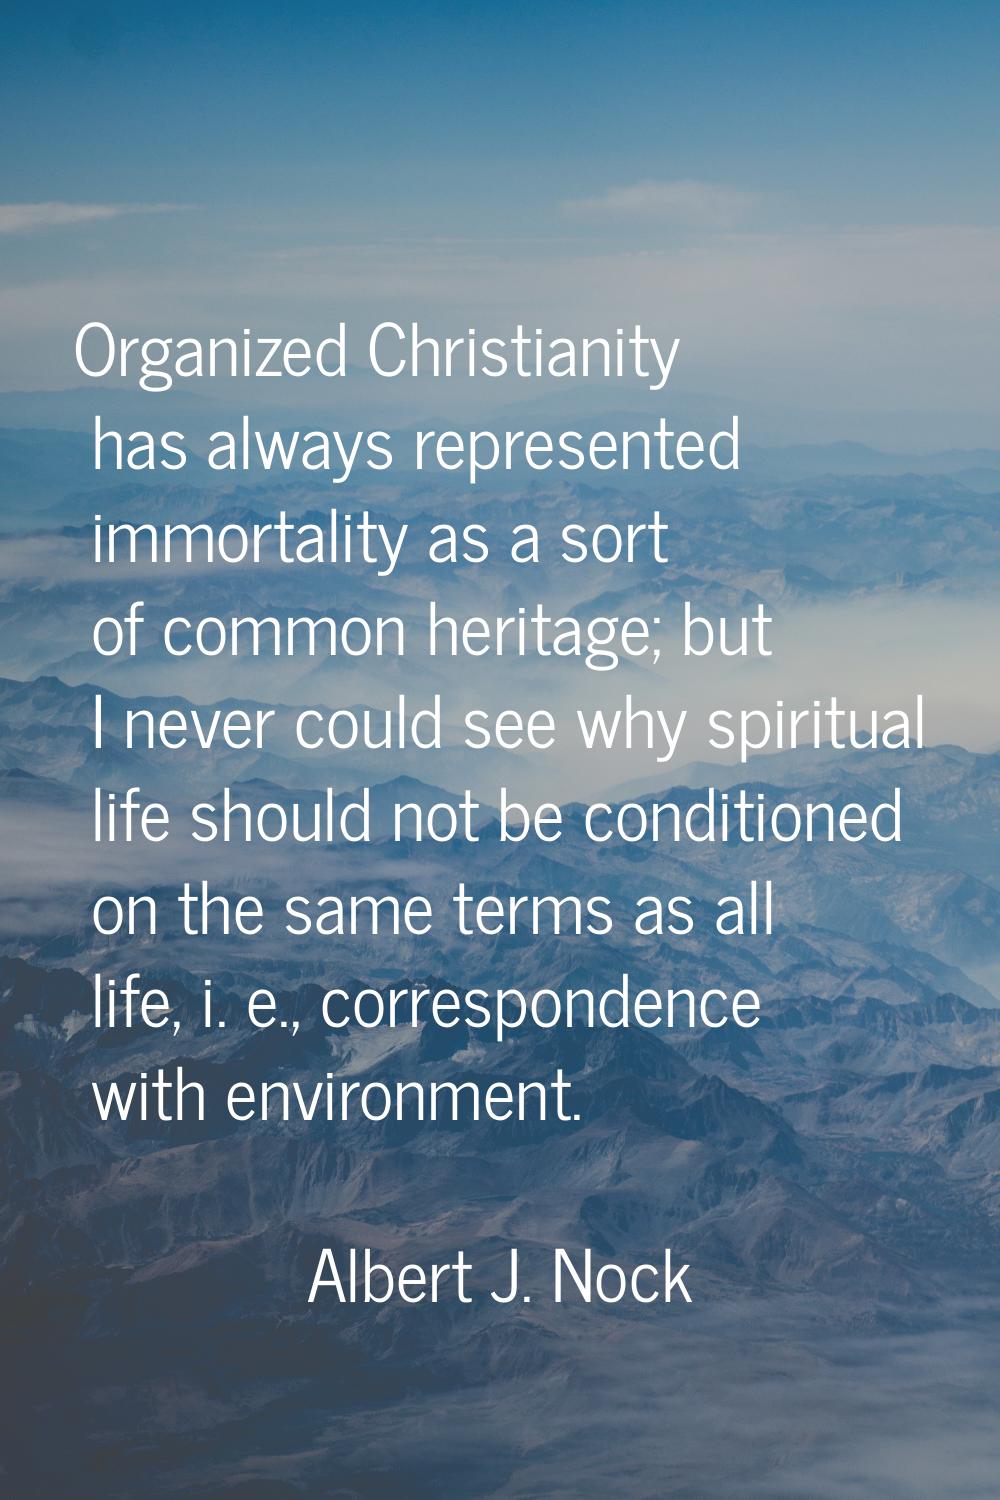 Organized Christianity has always represented immortality as a sort of common heritage; but I never